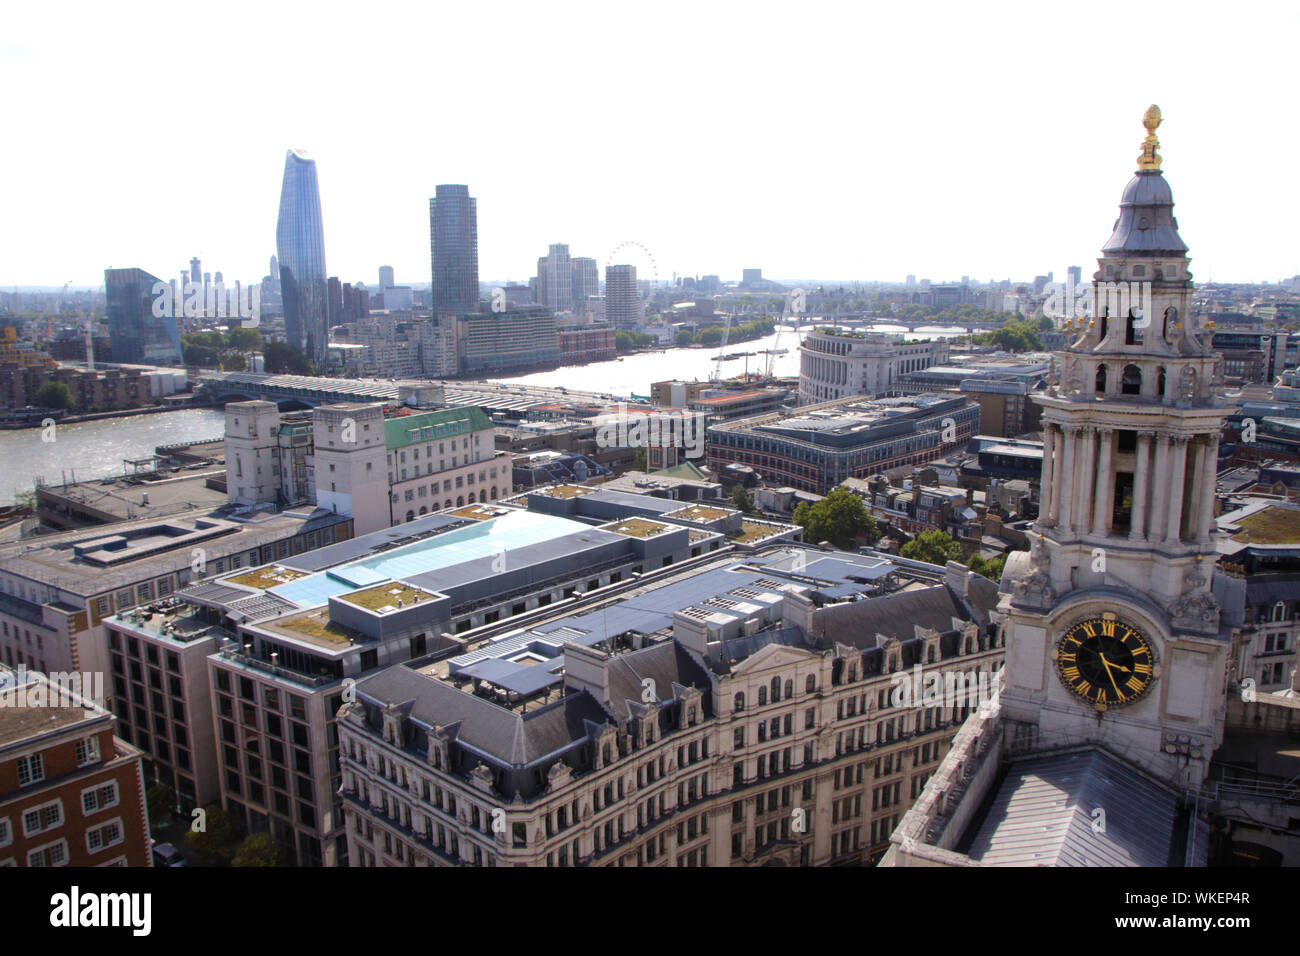 London skyline view from St Paul's Cathedral 2019 Stock Photo